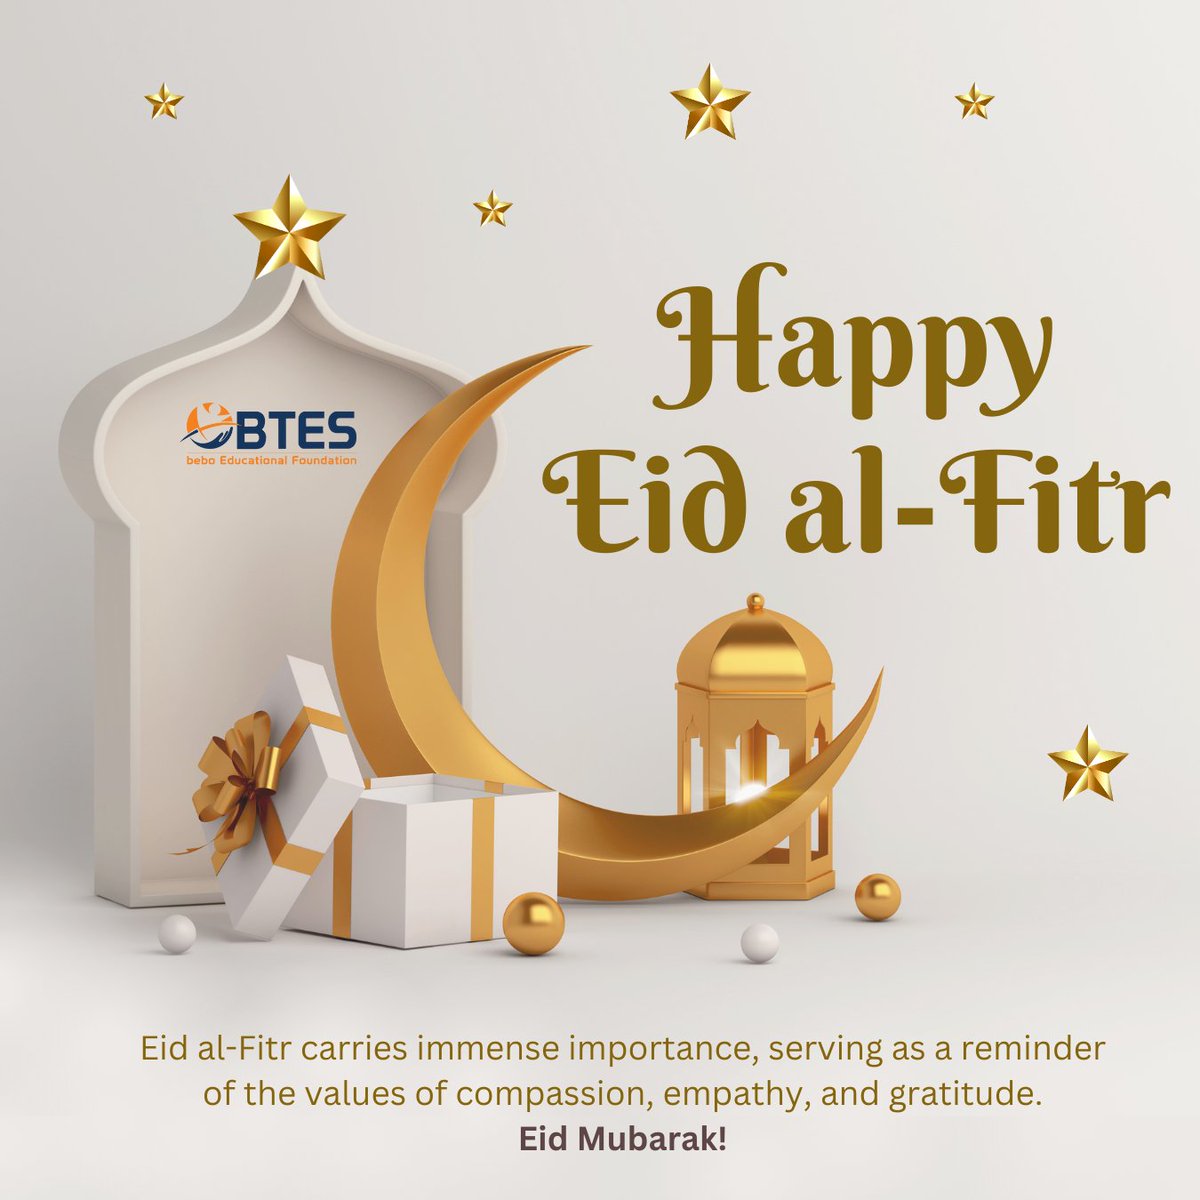 Warm Eid greetings from BTES! May this joyous occasion fill your hearts with peace, happiness, and prosperity.

#EidMubarak #HappyEid #EidCelebration #EidGreetings #beboTechnologies #BTES